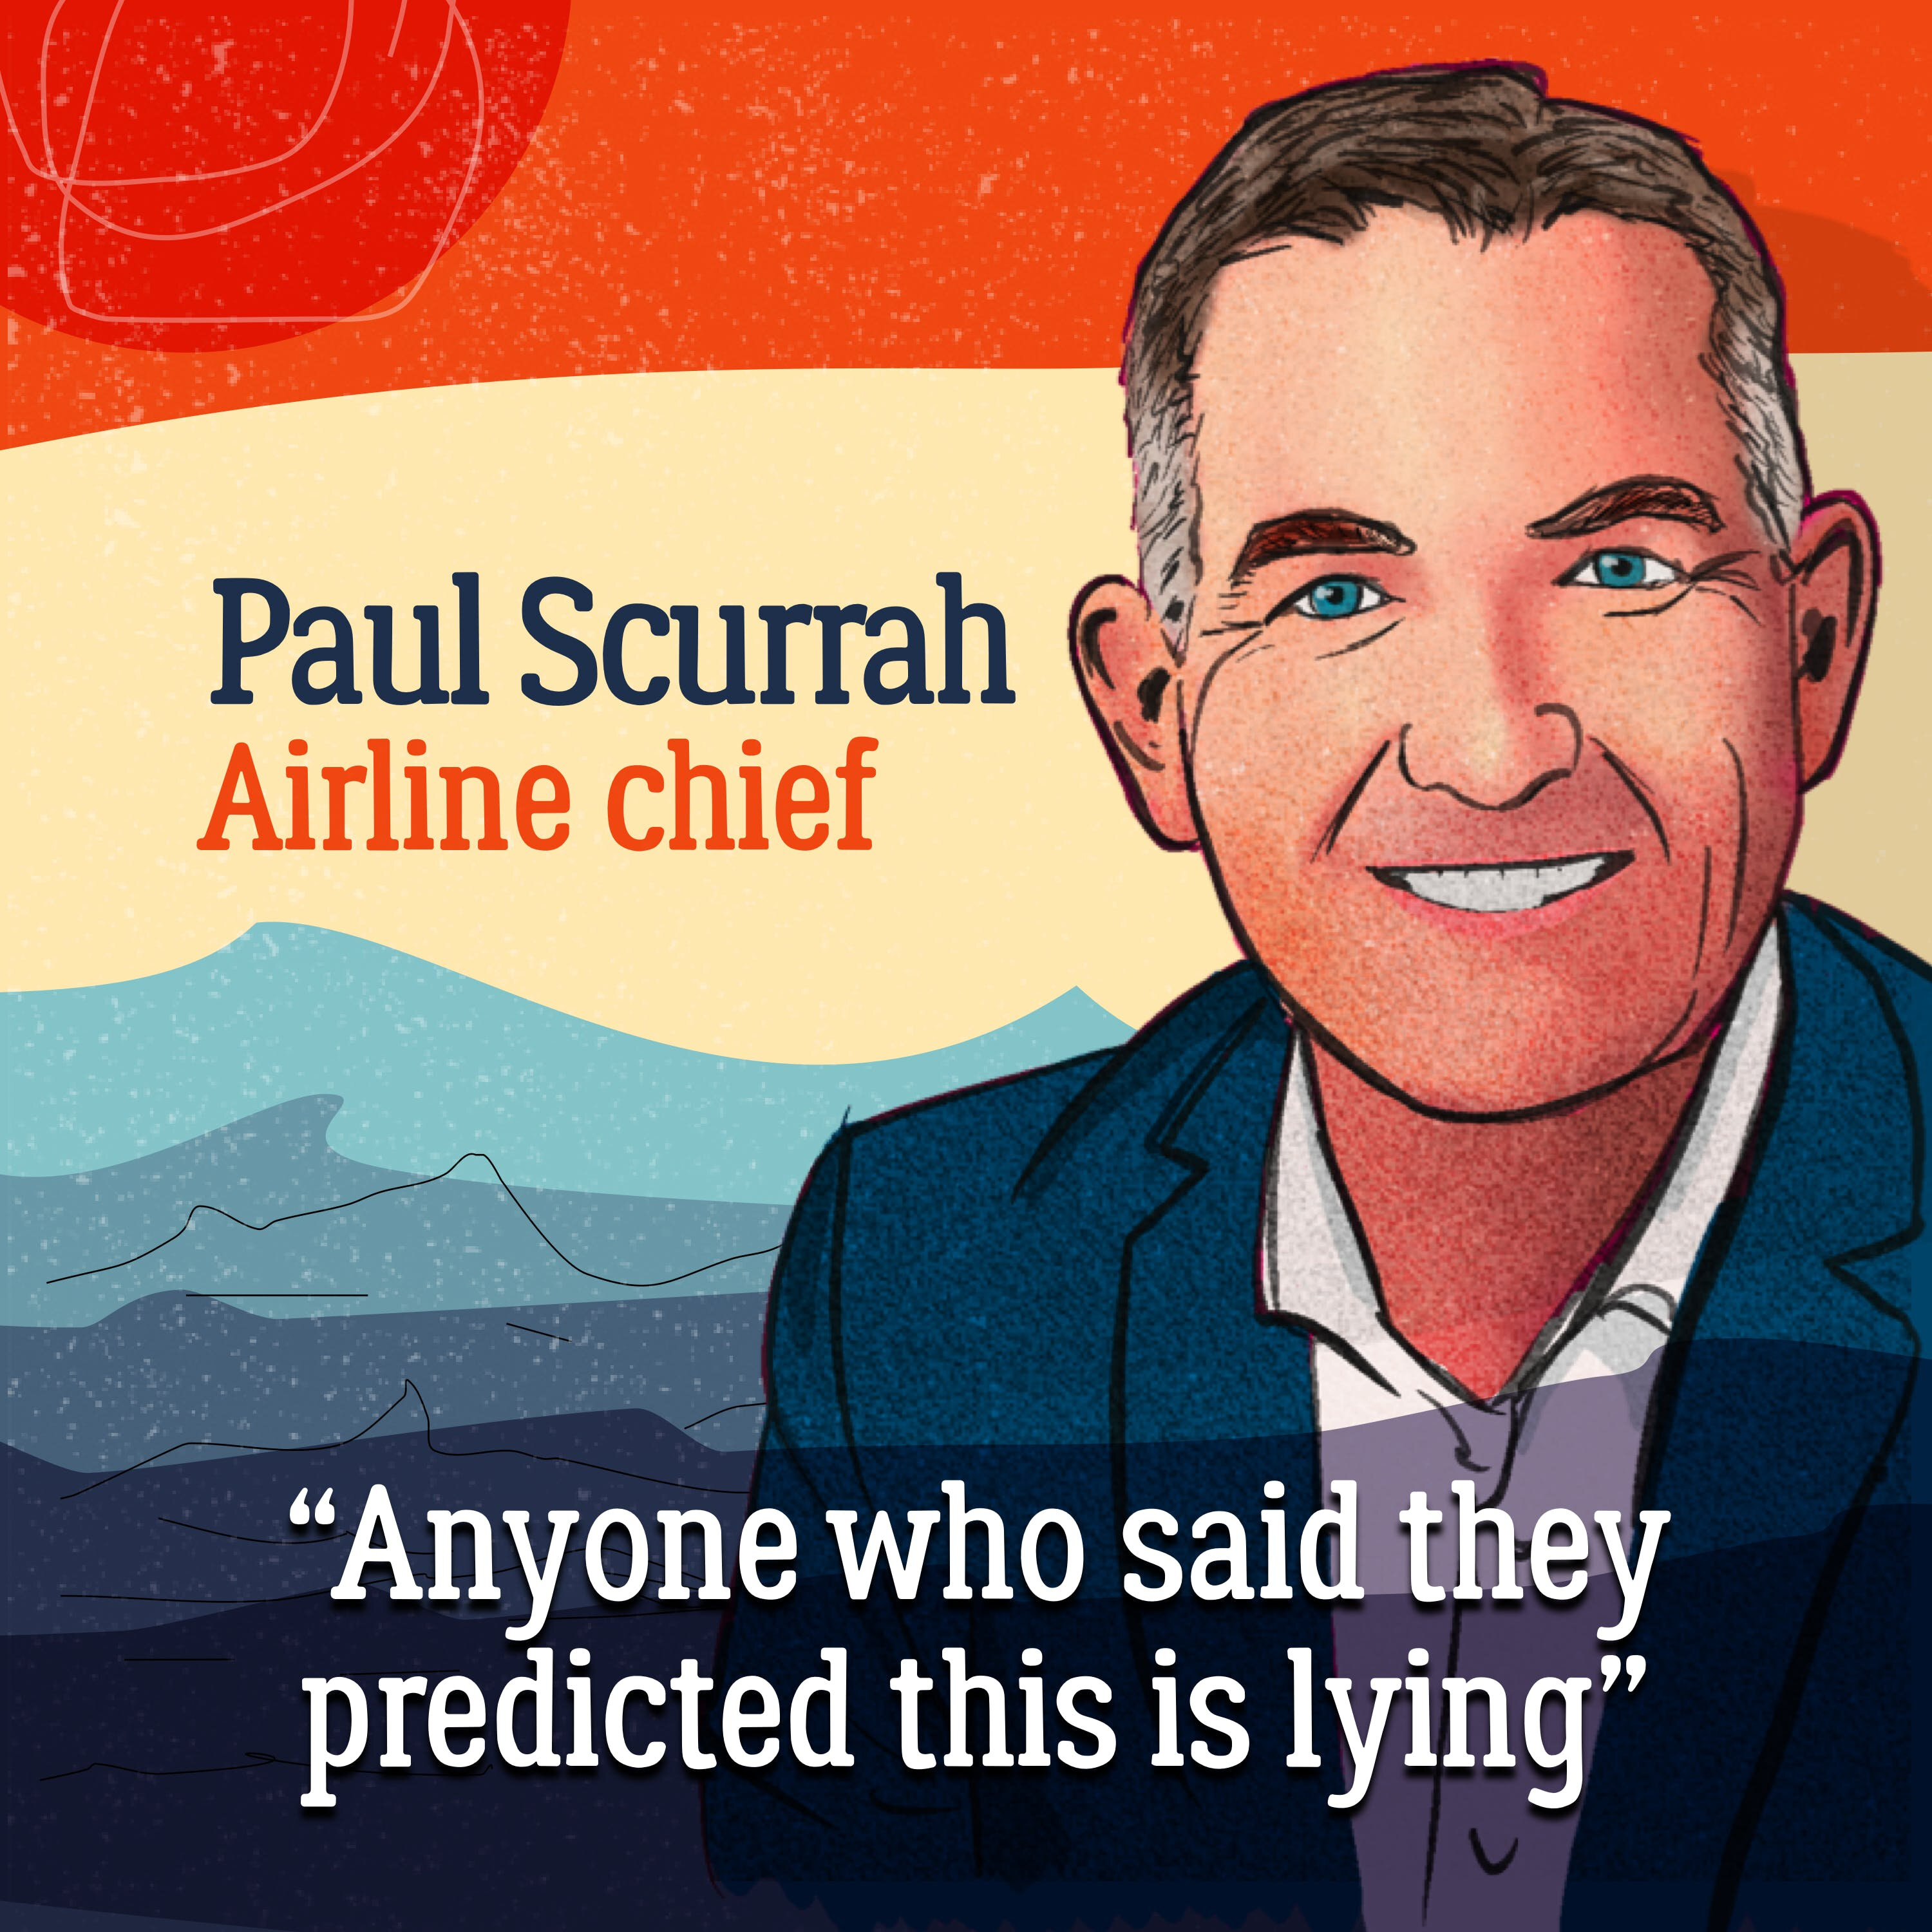 Turbulent times — the moment Paul Scurrah knew his company was grounded